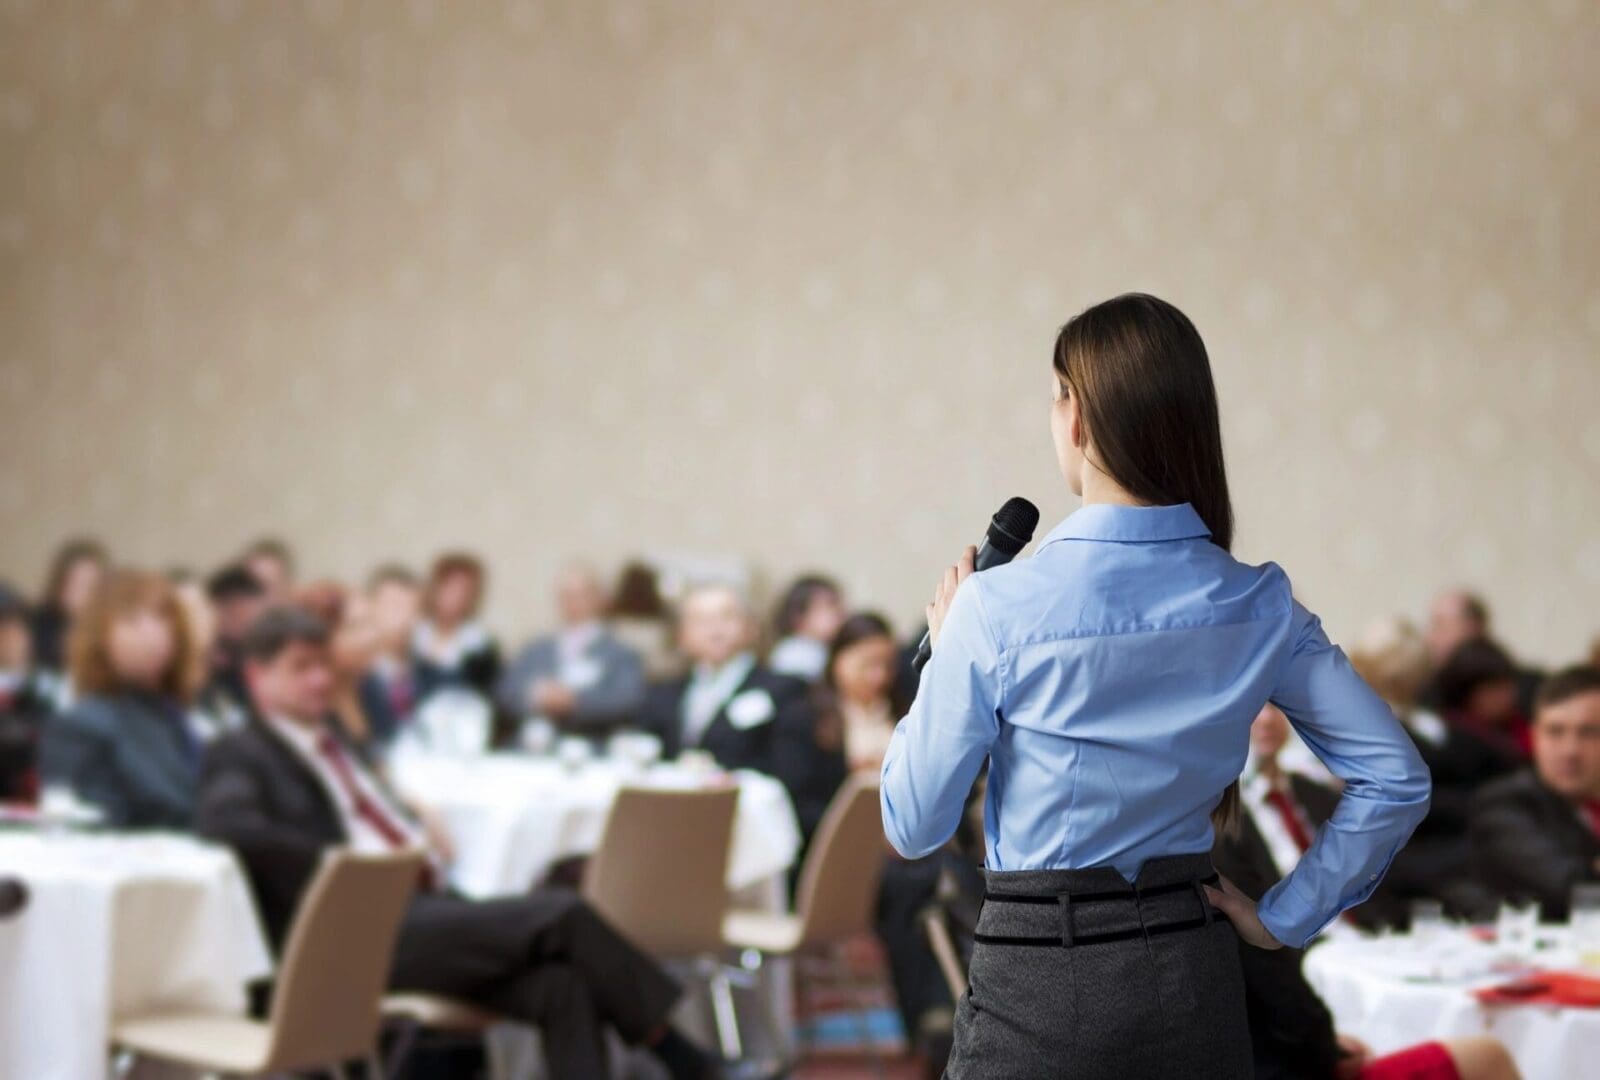 A business woman giving a speech in front of an audience.